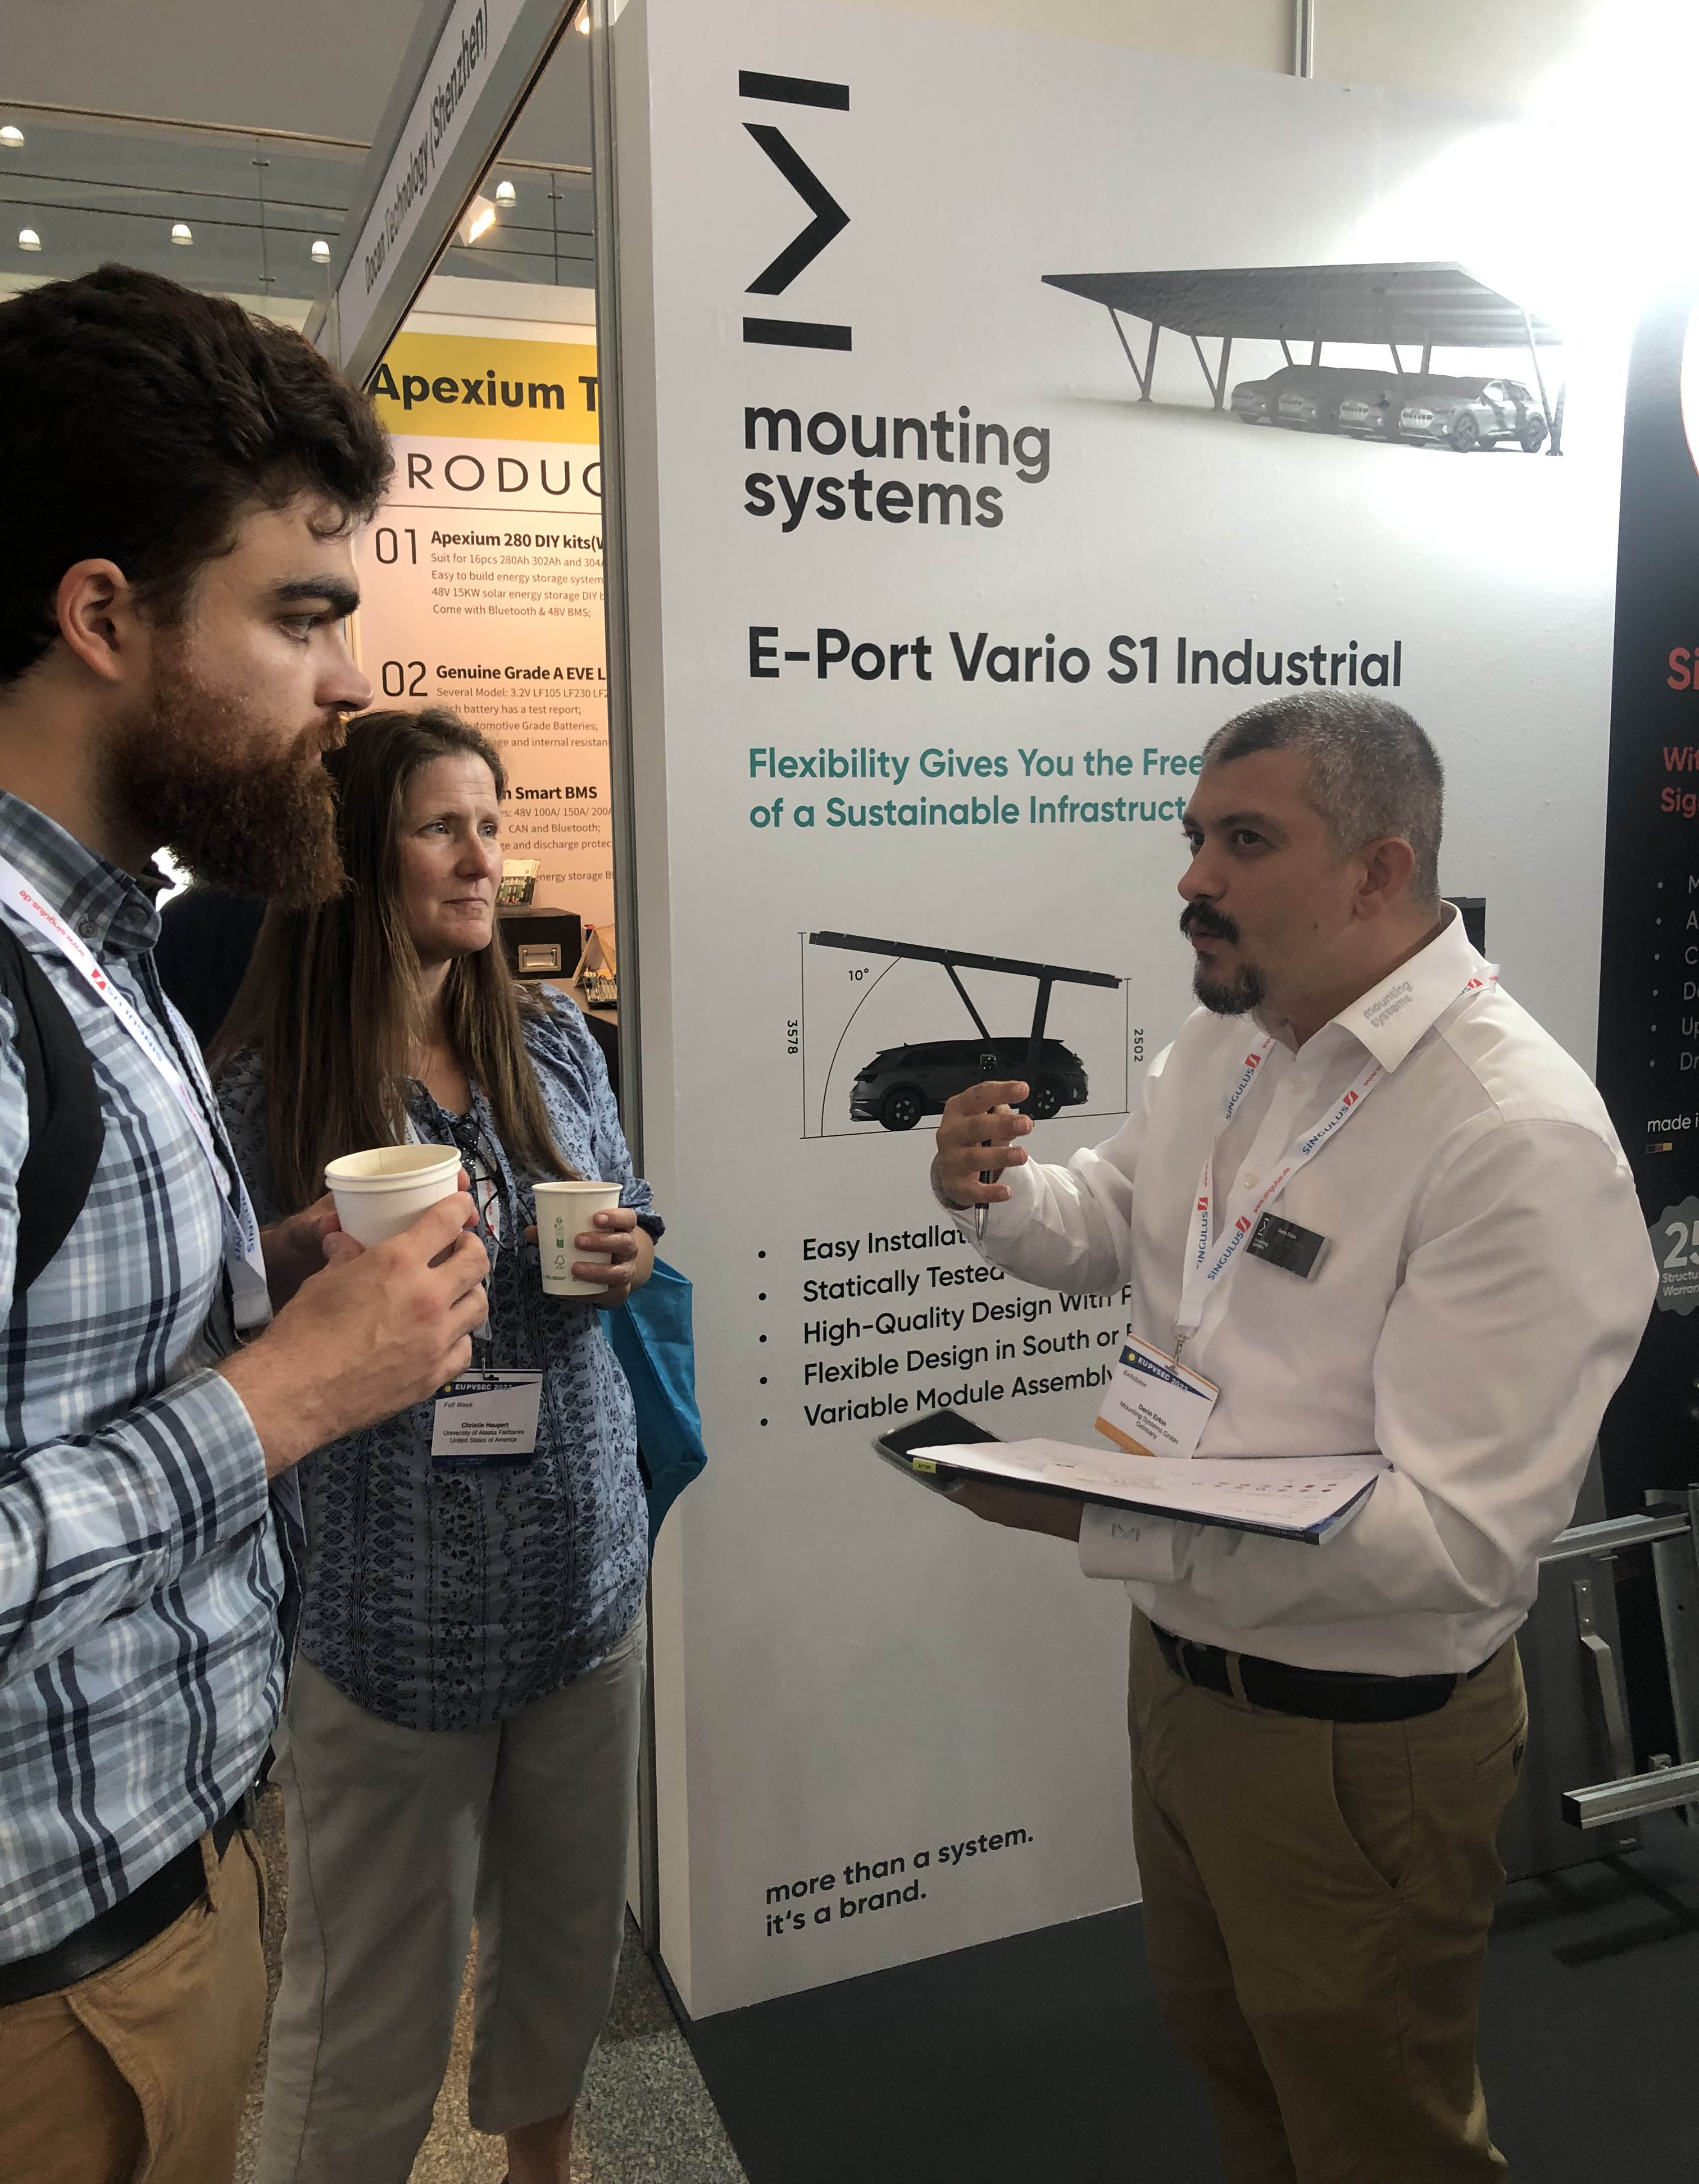 ACEP researchers speak with an industry professional about solar racking at the European Photovoltaic Solar Energy Conference.